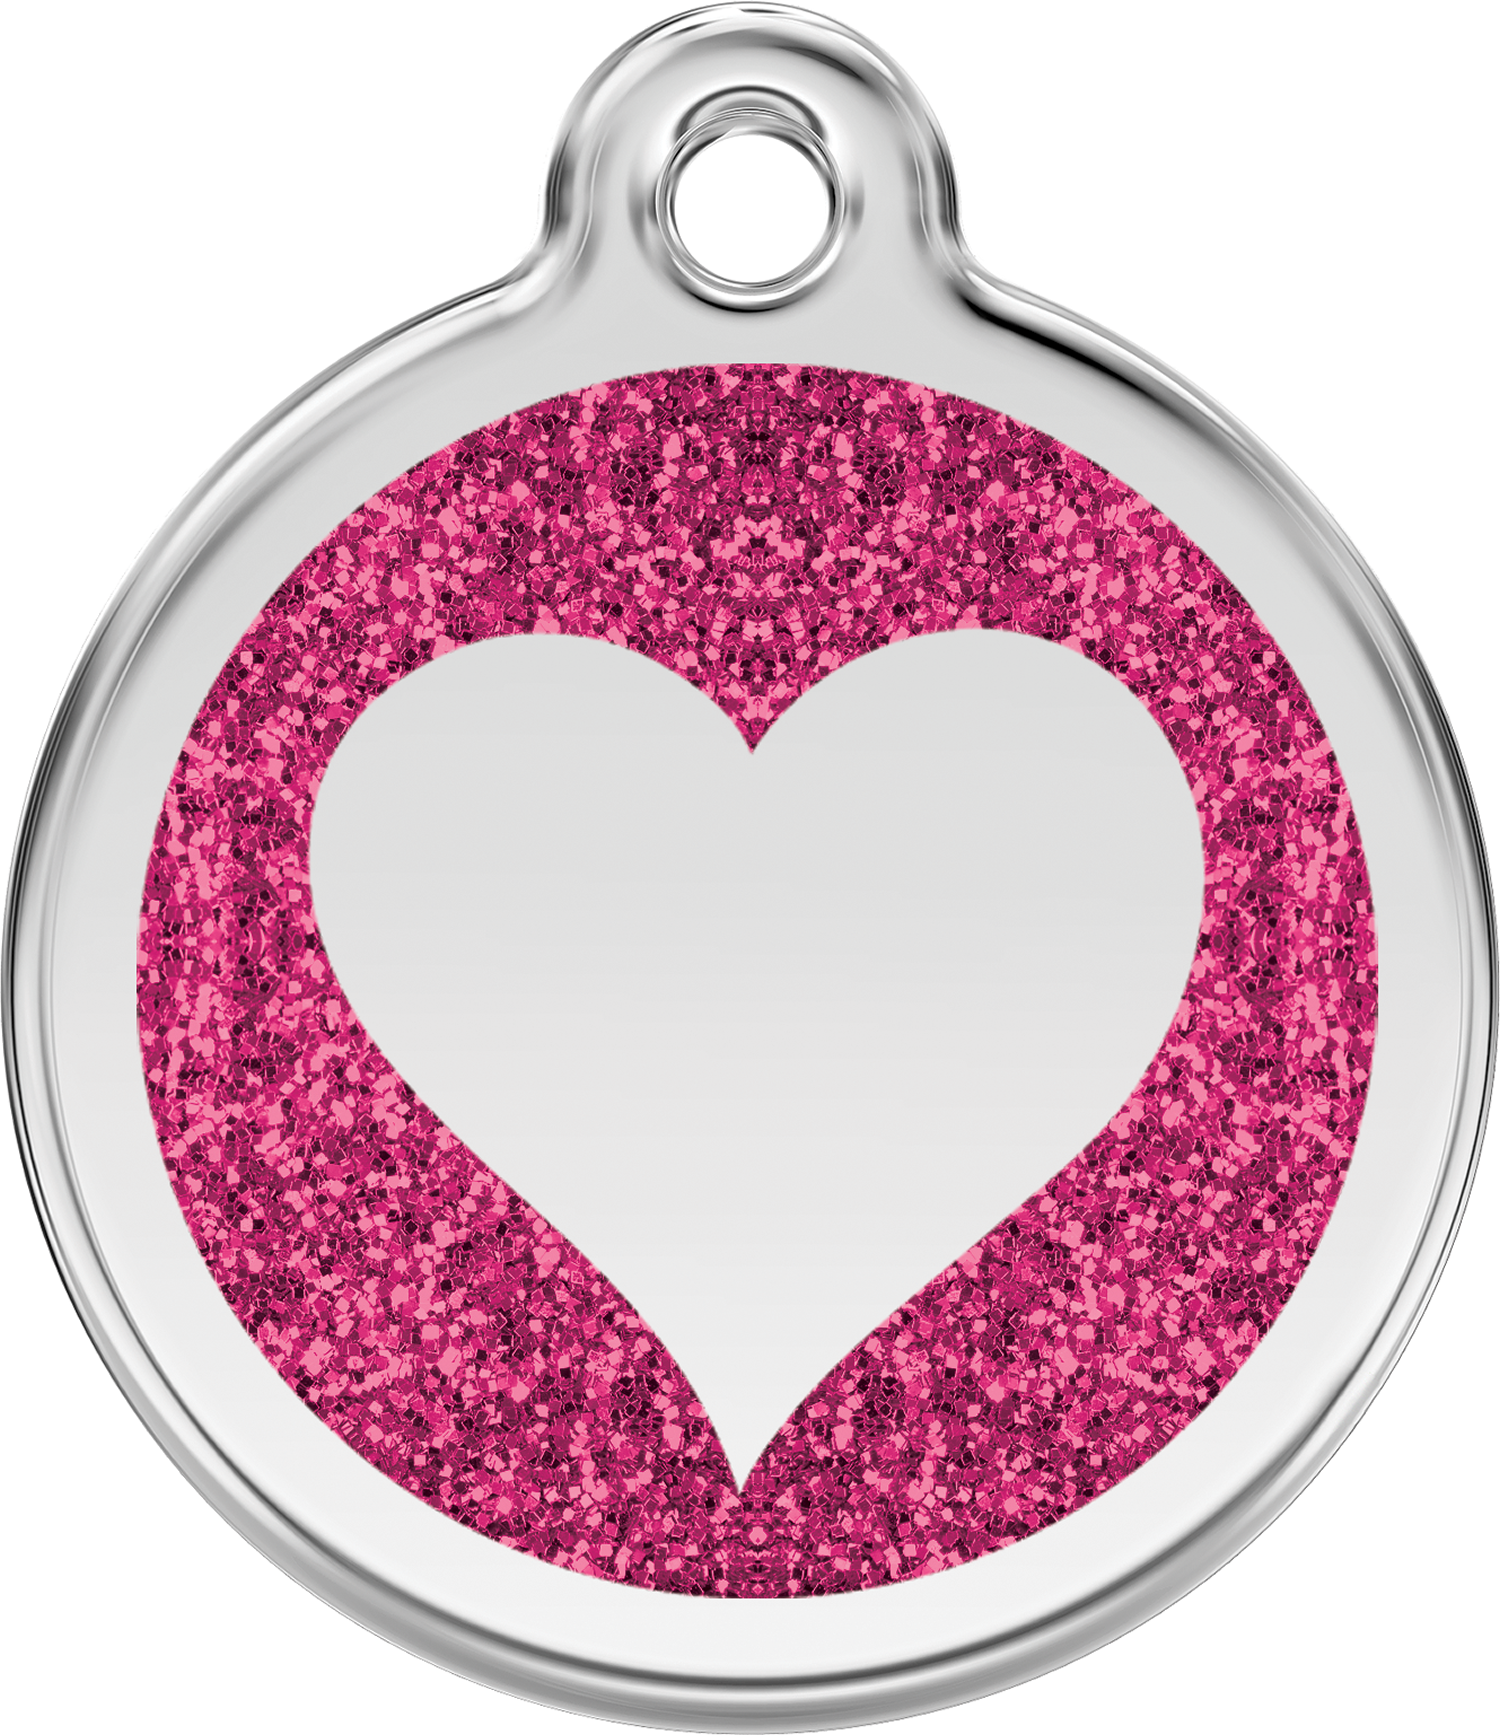 Red Dingo Glitter Enamel Tag Heart Hot Pink 0x Ht Hp - Red Dingo Glitter Enamel Heart Cat Id Tag - Hot Pink (1500x1735)